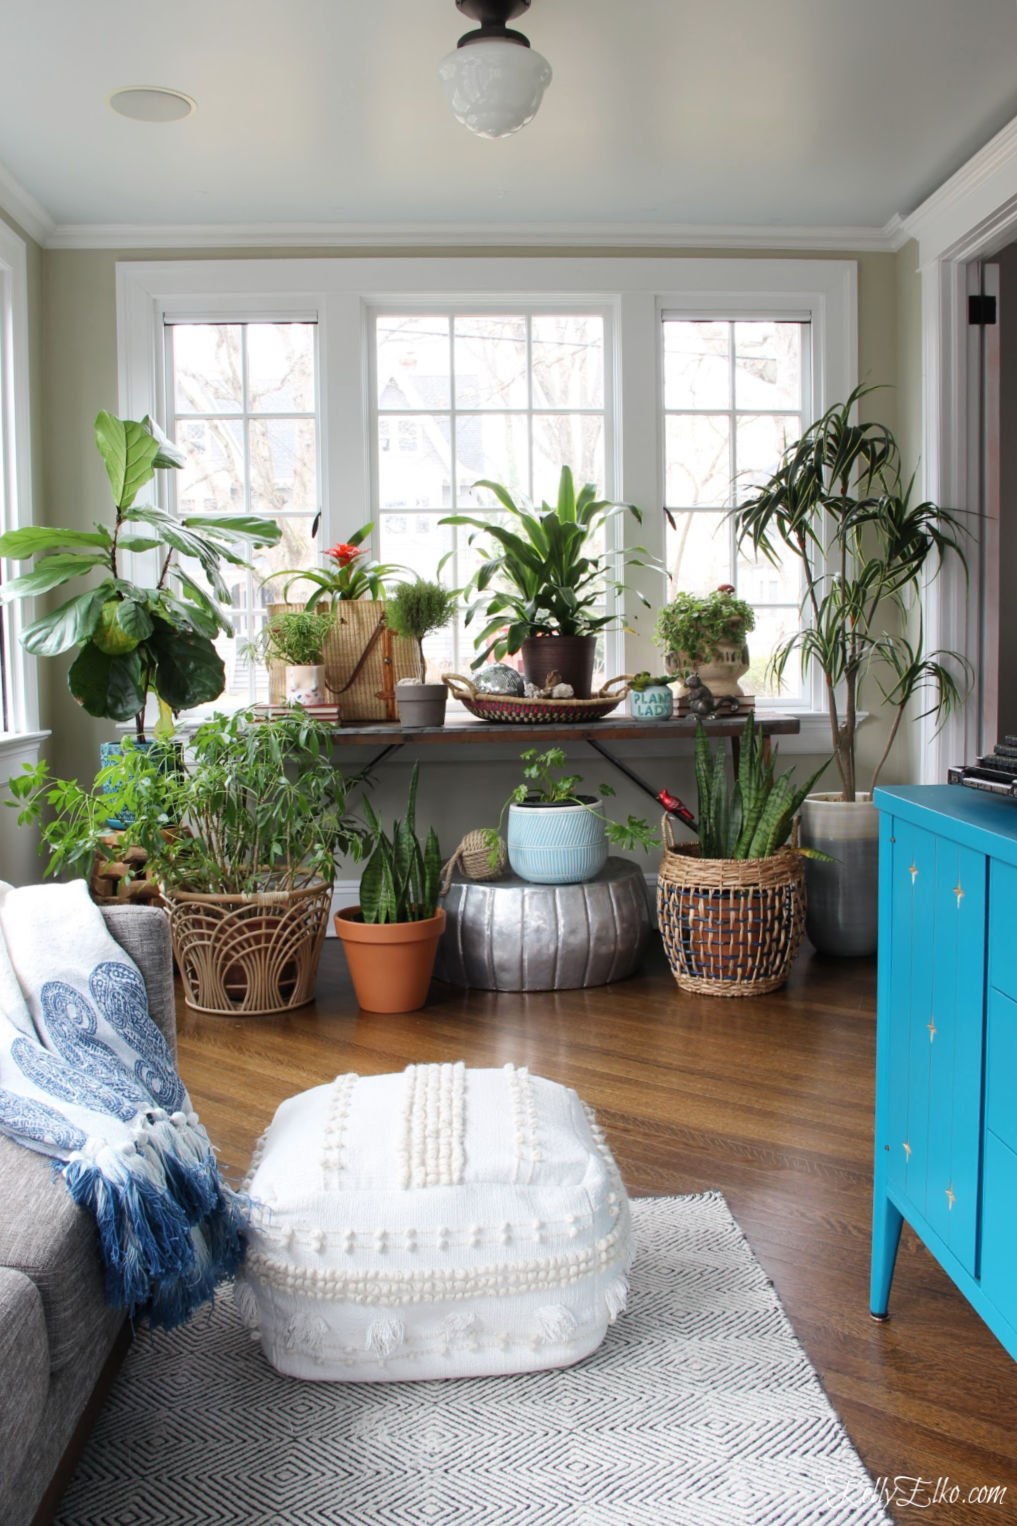 Great tips and tricks for growing and caring for houseplants. Her sunroom is filled with the most beautiful plants kellyelko.com #plants #planters #plantlady #gardener #gardens #tipsandtricks #sunroom #sunroomdecor #jungalow 